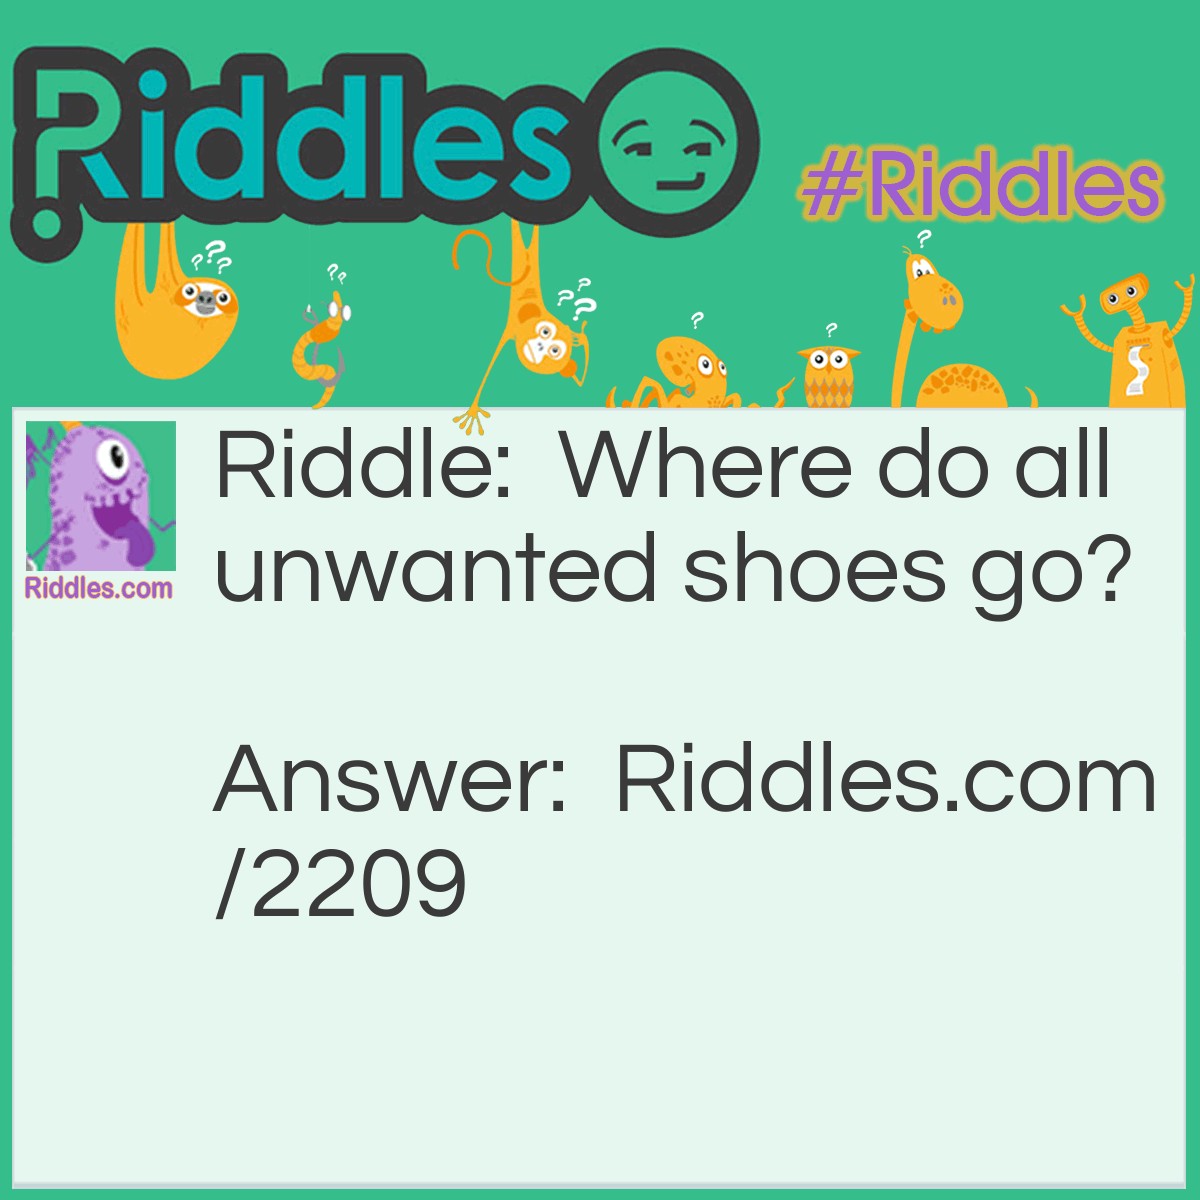 Riddle: Where do all unwanted shoes go? Answer: Boot camp.